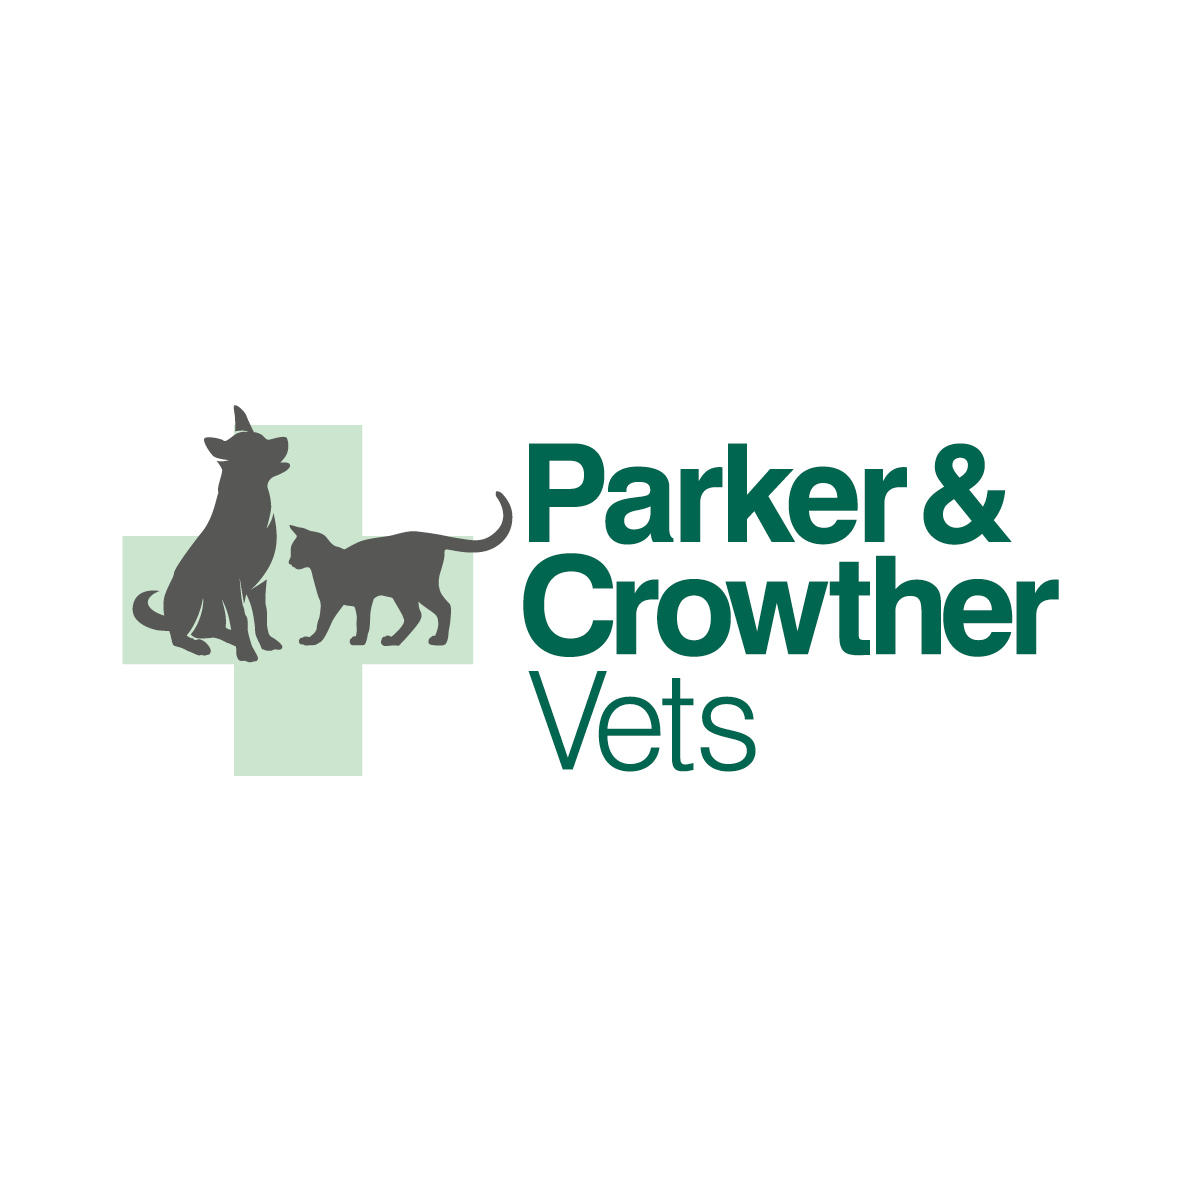 Parker & Crowther Vets, Maghull - Liverpool, Merseyside L31 7BN - 01515 317719 | ShowMeLocal.com